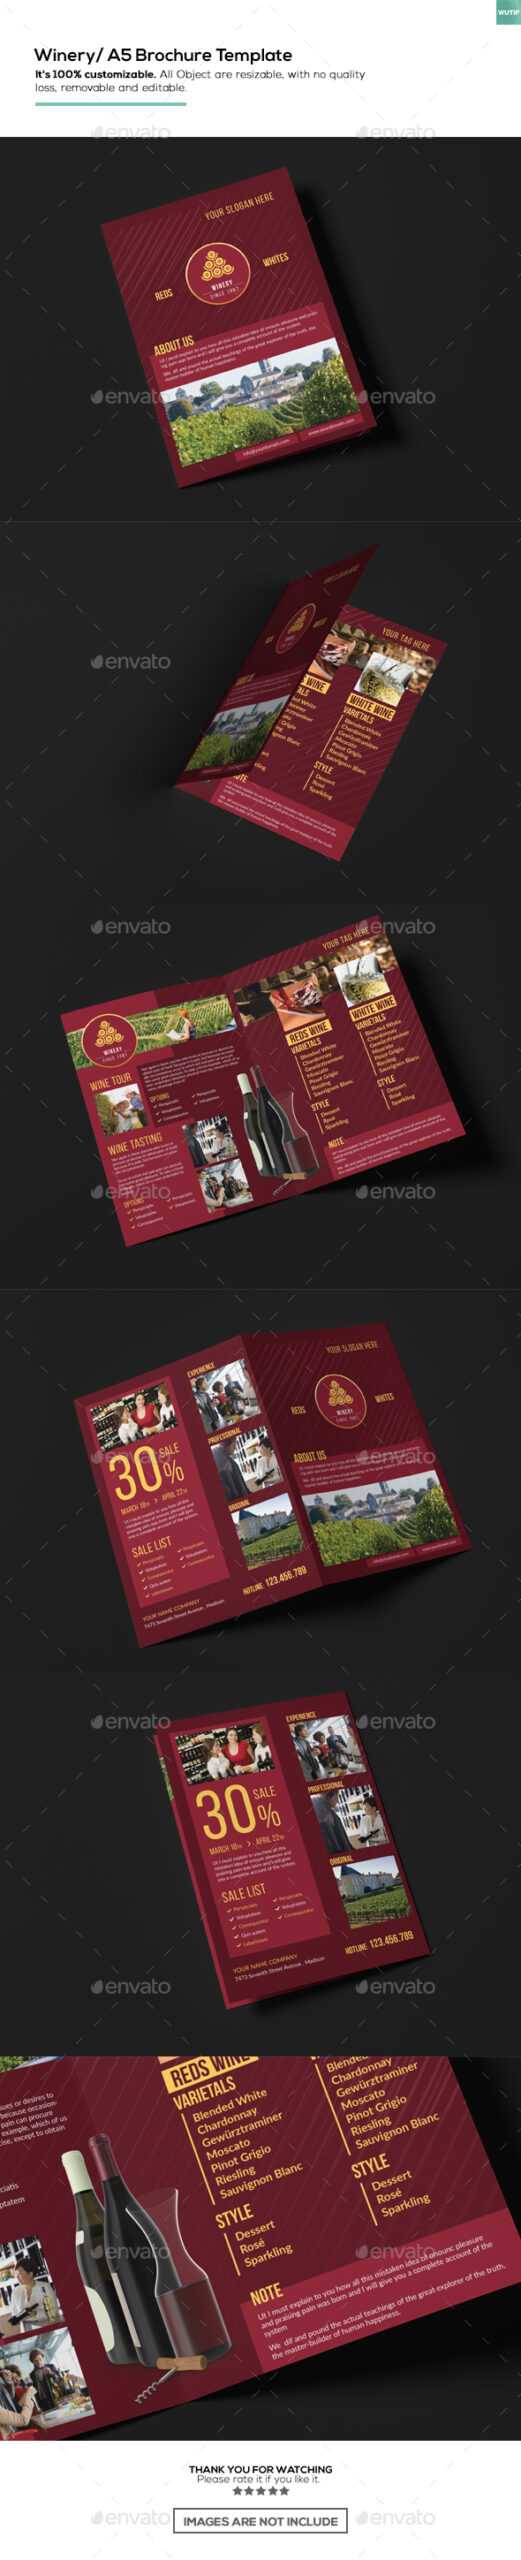 Wine Brochure Templates From Graphicriver Intended For Wine Brochure Template